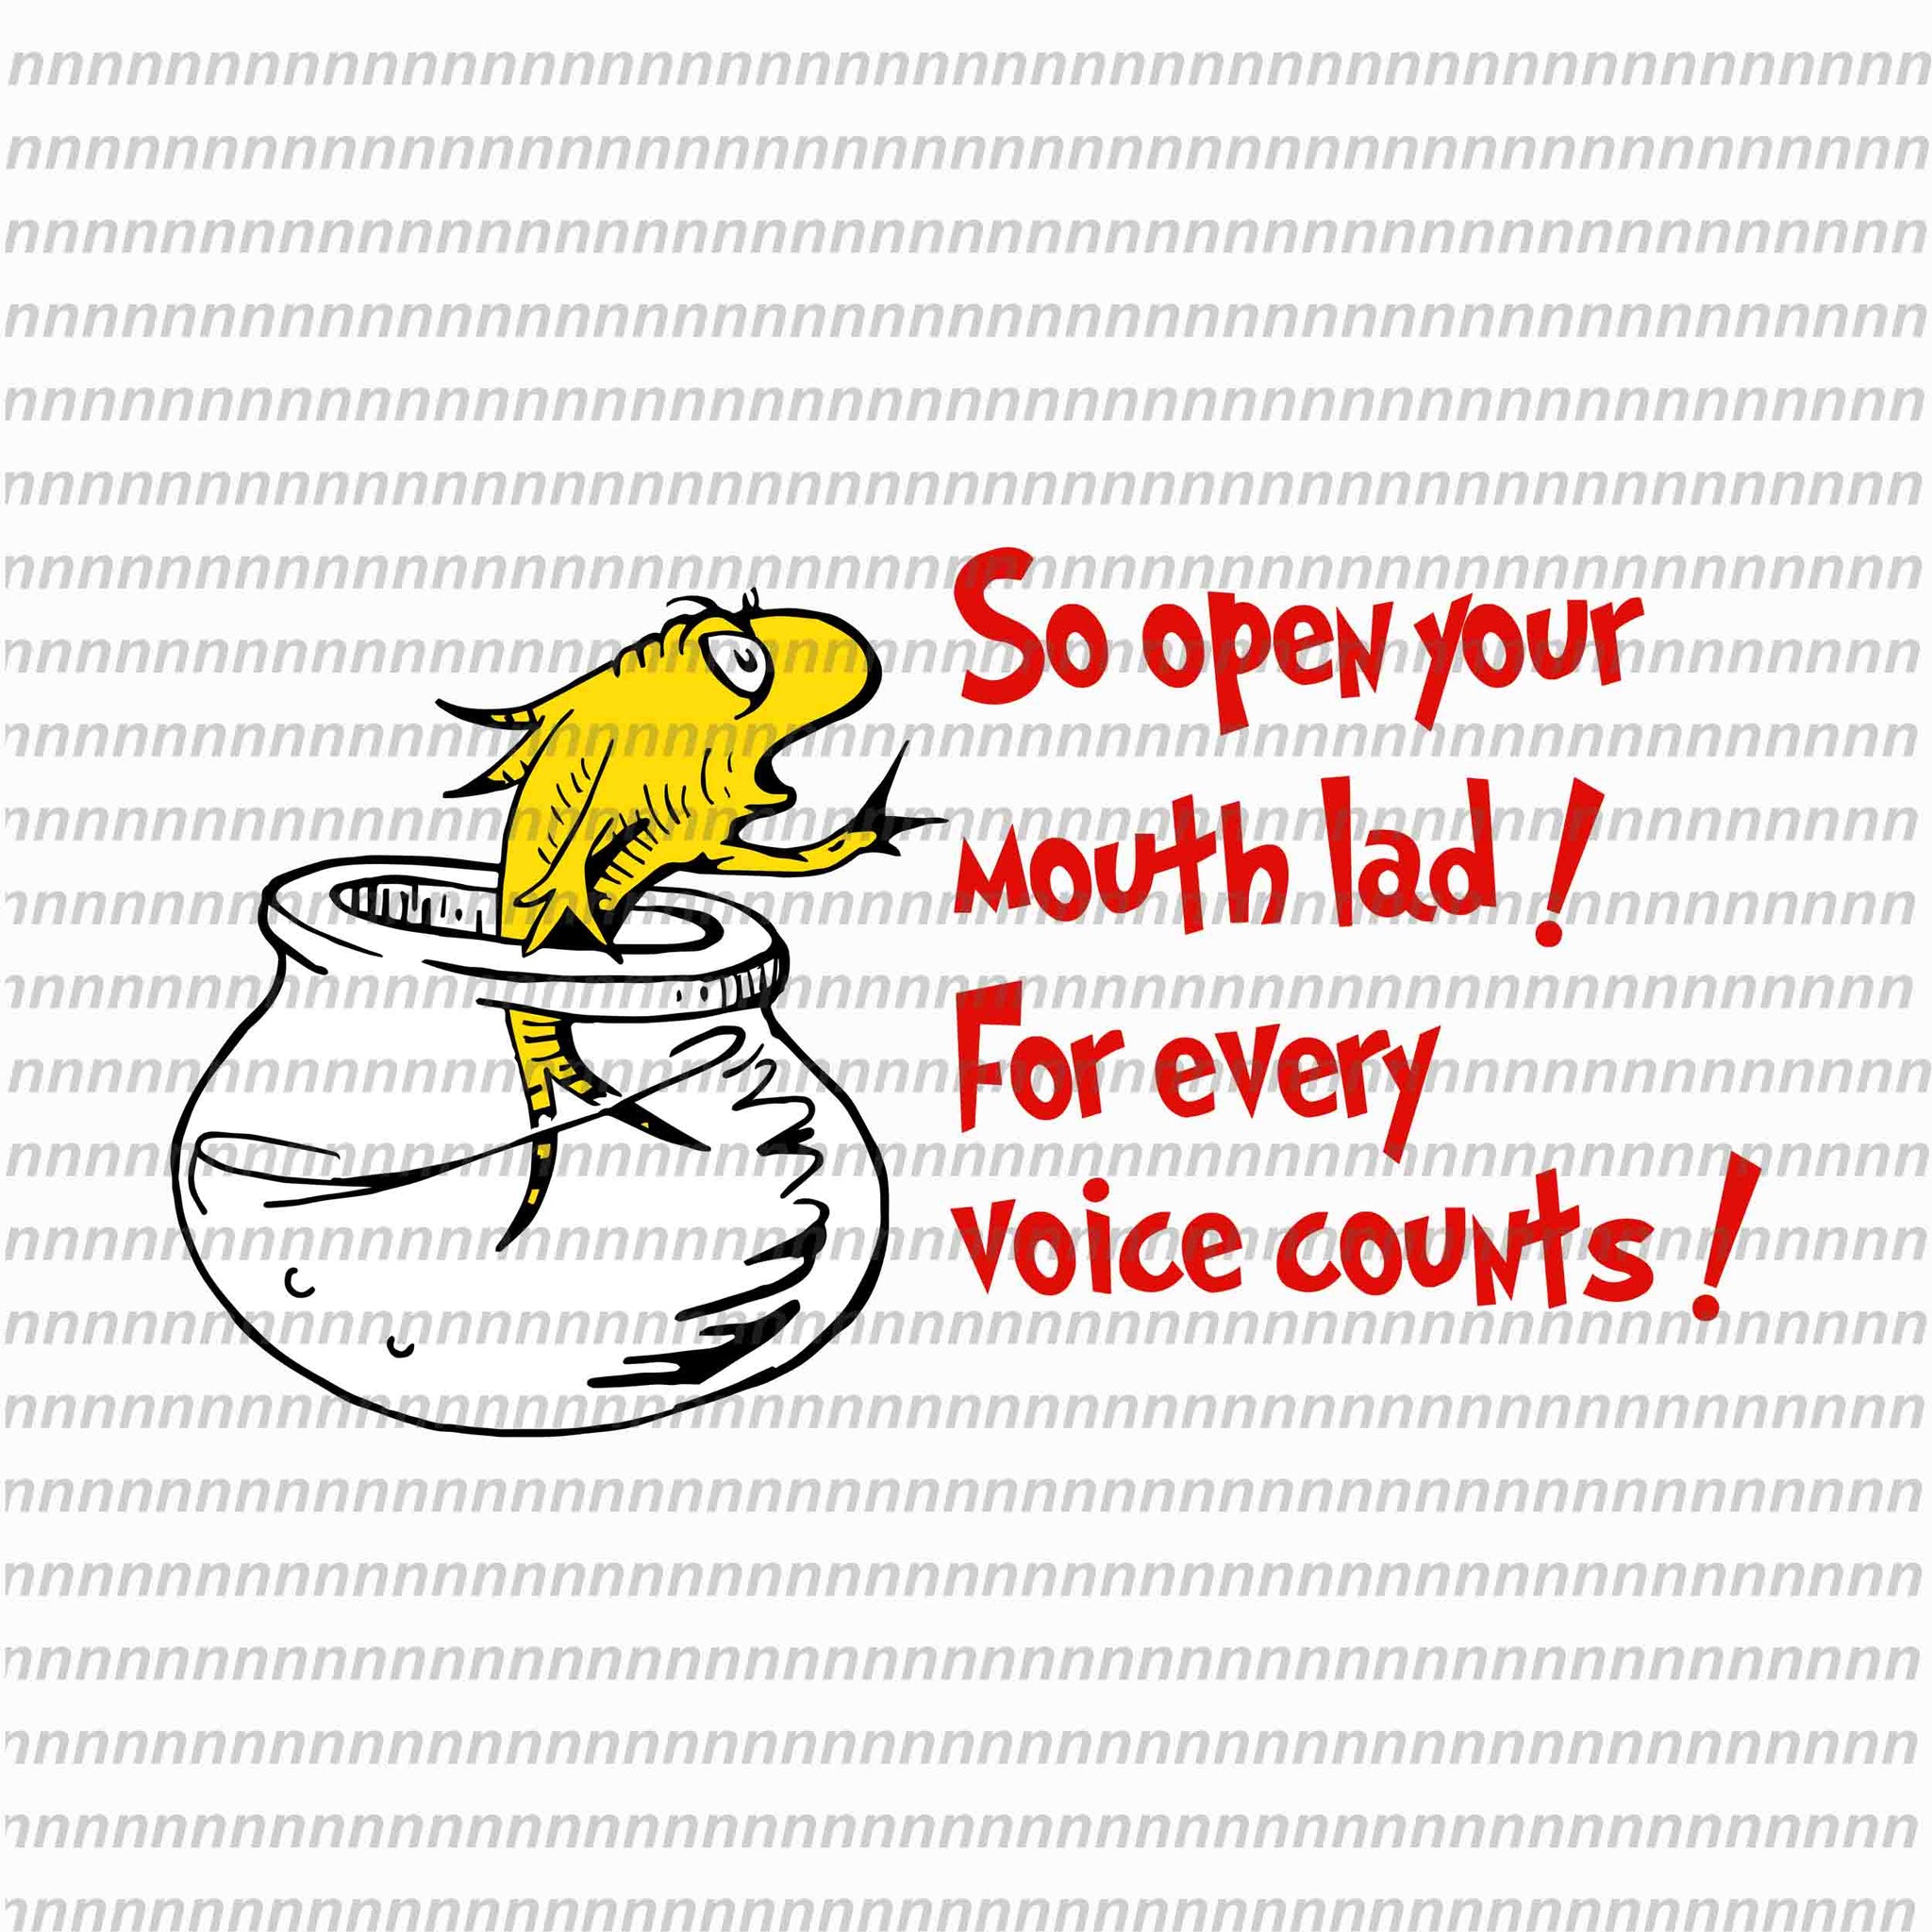 So open your mouth lad for every voice counts, dr seuss svg,dr seuss vector, dr seuss quote, dr seuss design, Cat in the hat svg, thing 1 thing 2 thing 3, svg, png, dxf, eps file